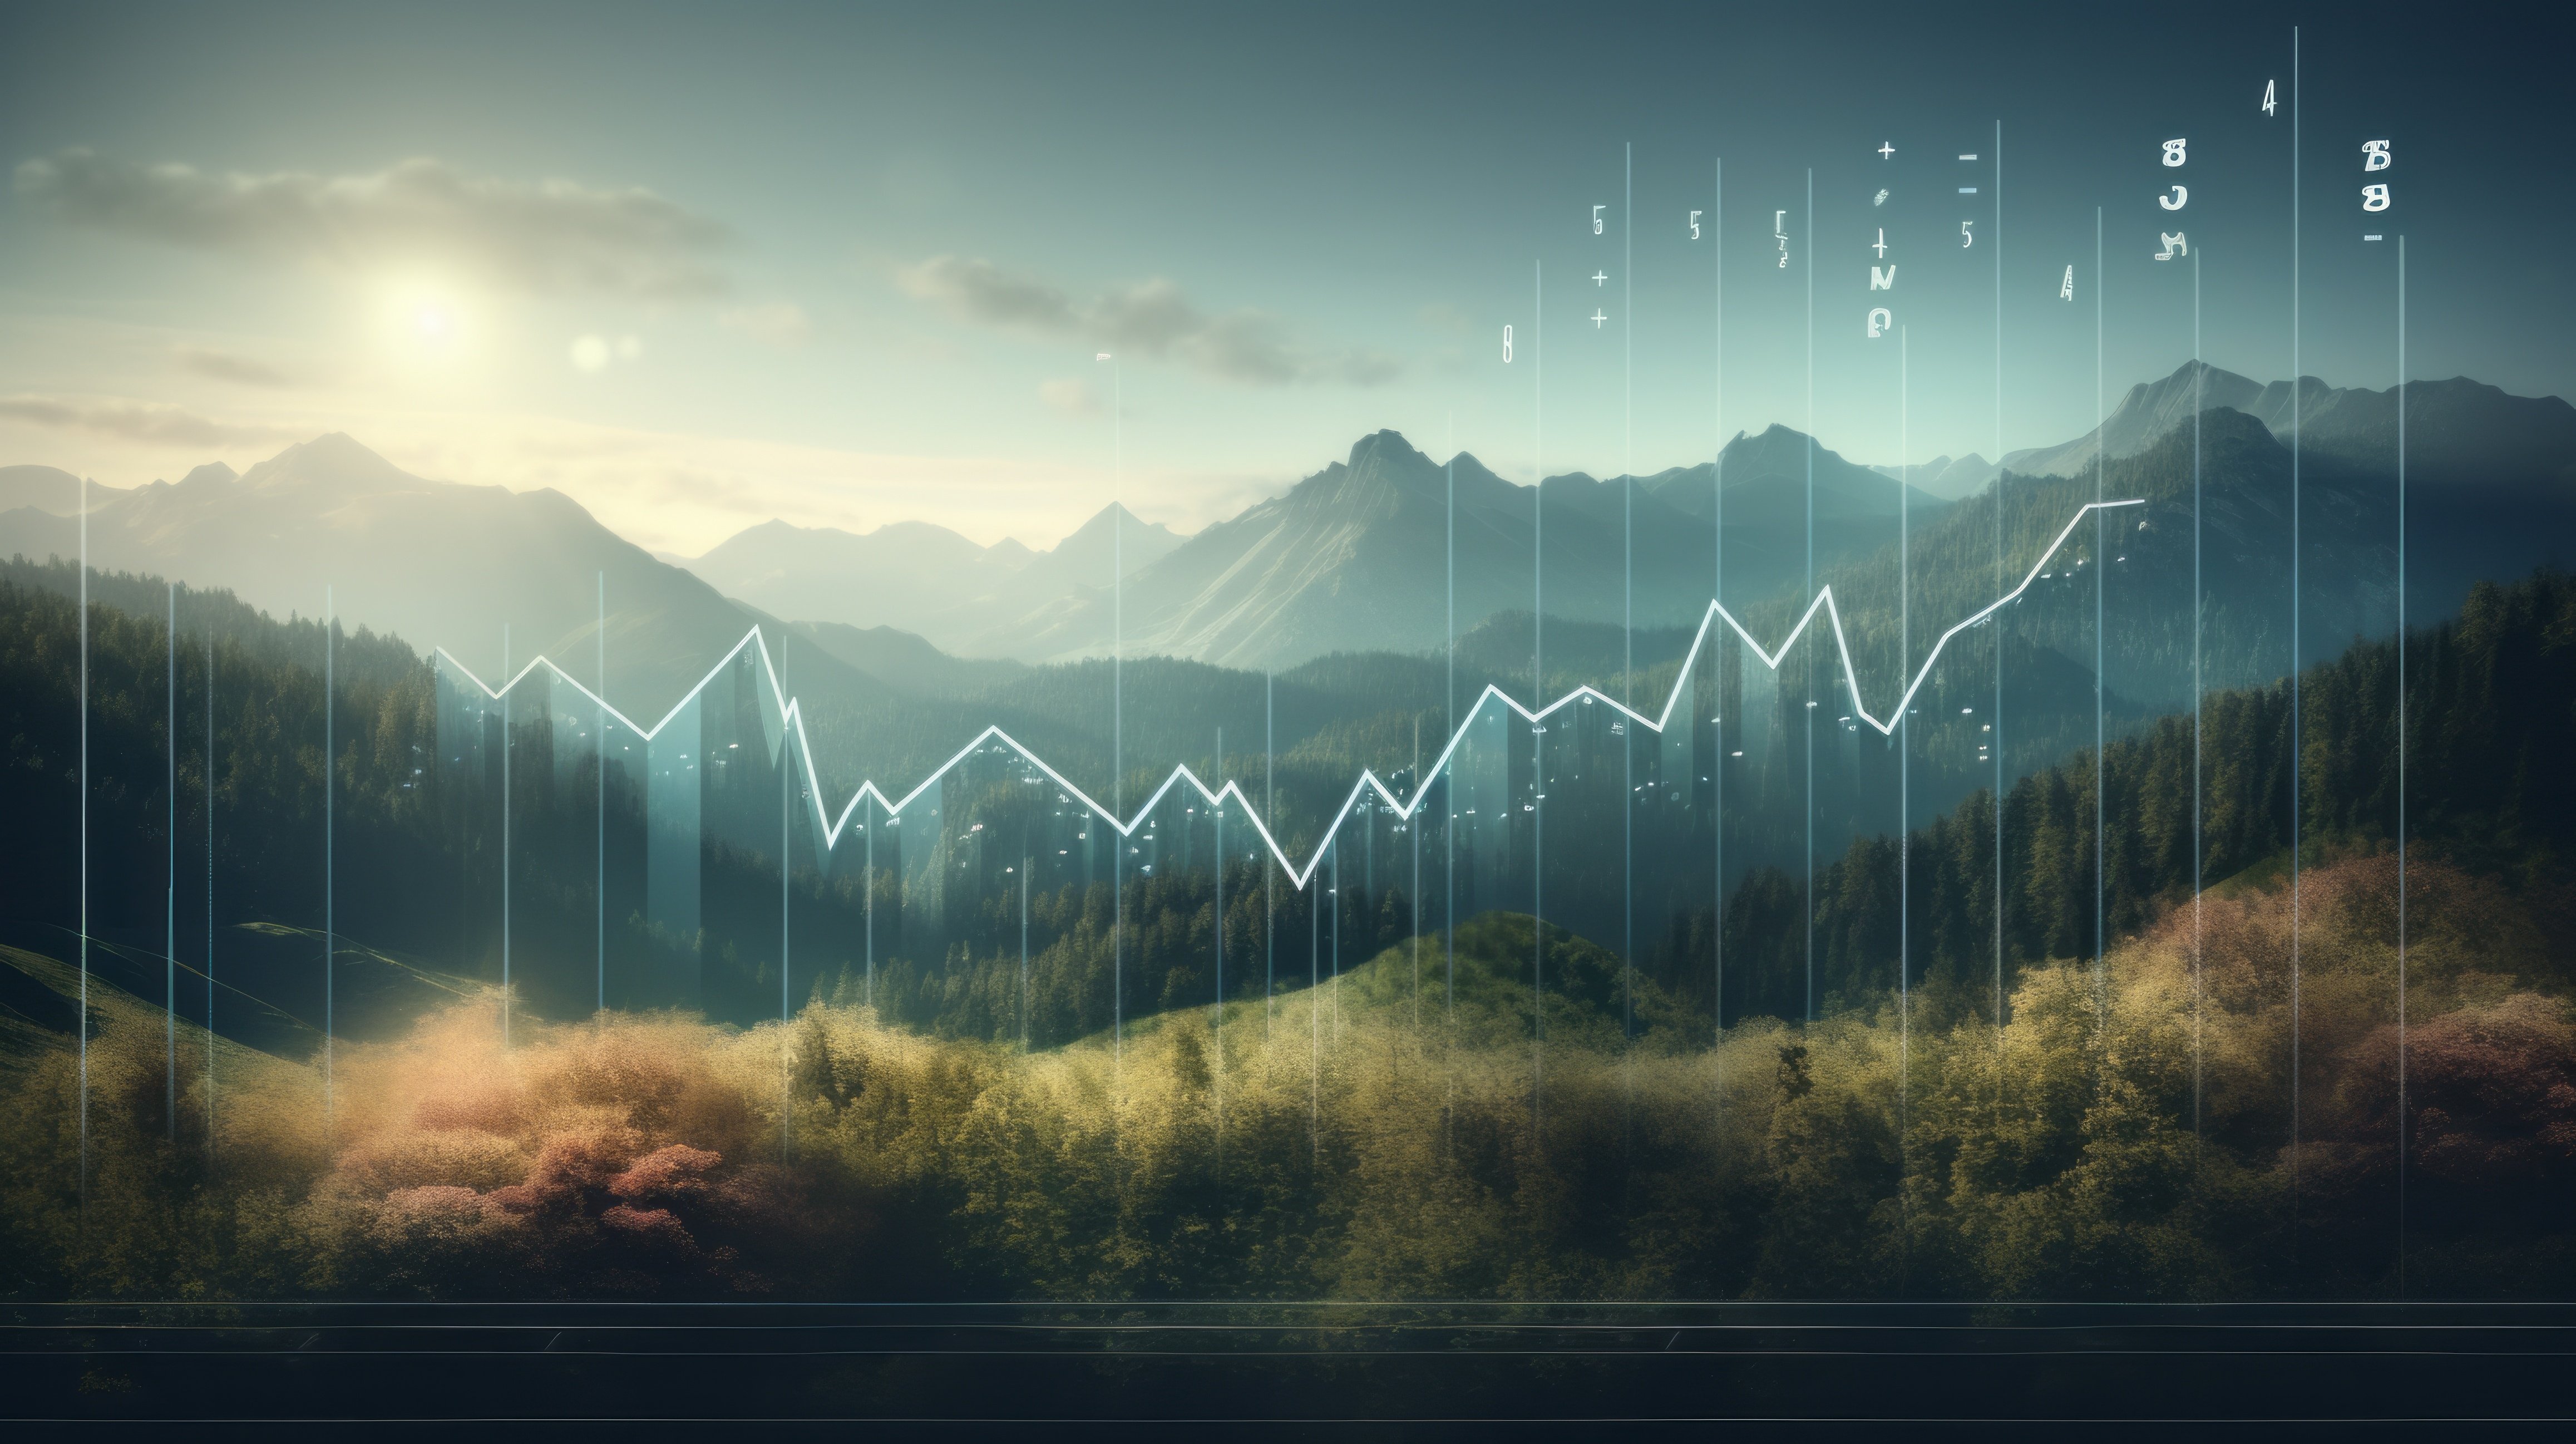 A mountain range with a glowing blue line graph superimposed on it, representing the accurate and timely compliance reporting services offered by the company.